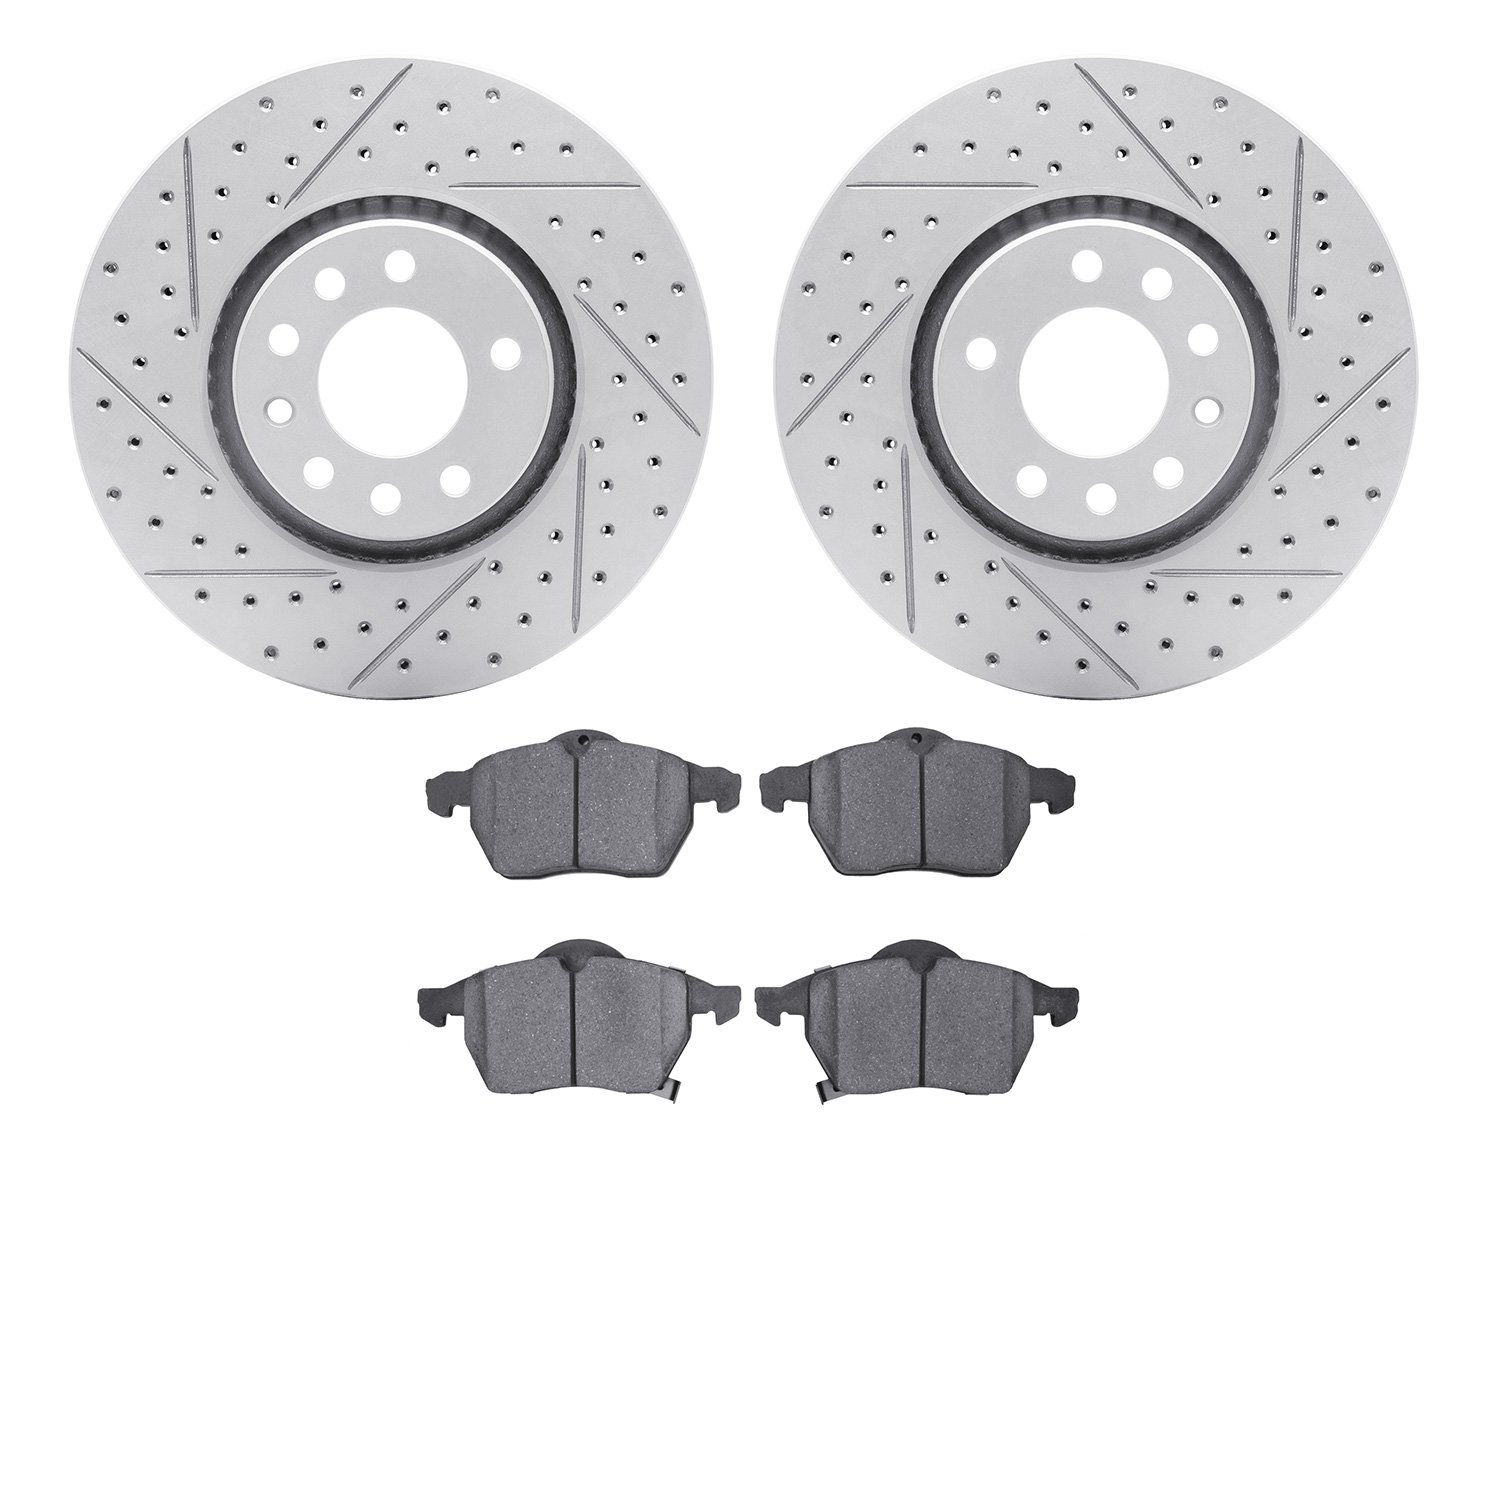 2502-65005 Geoperformance Drilled/Slotted Rotors w/5000 Advanced Brake Pads Kit, 2006-2006 GM, Position: Front